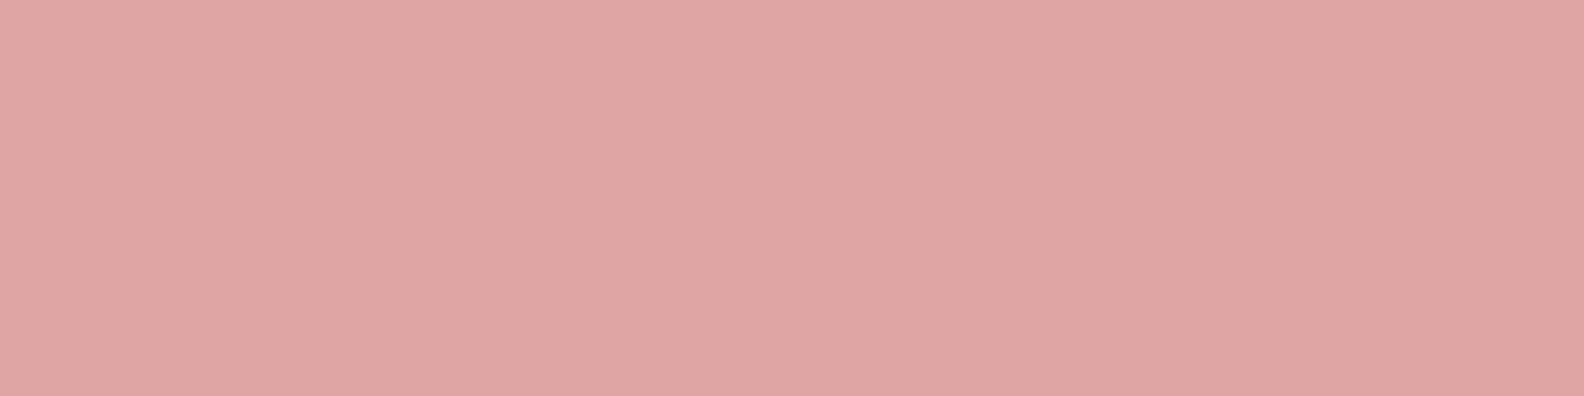 1584x396 Pastel Pink Solid Color Background